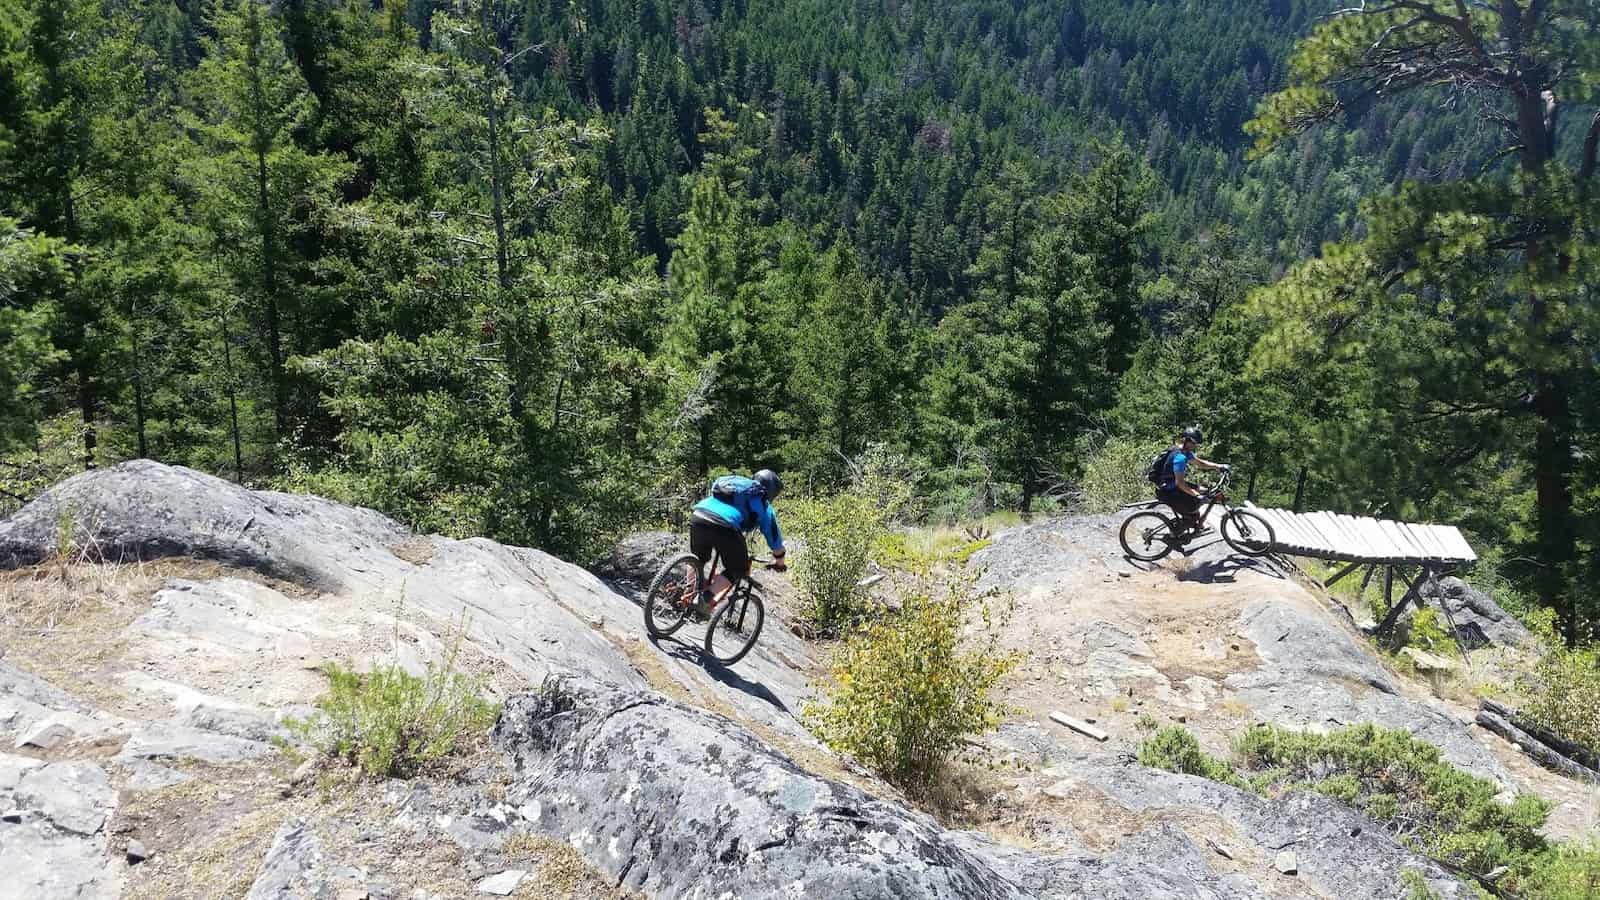 Things to do in Merritt BC Canada- Ridge trail the slab off camber rock 